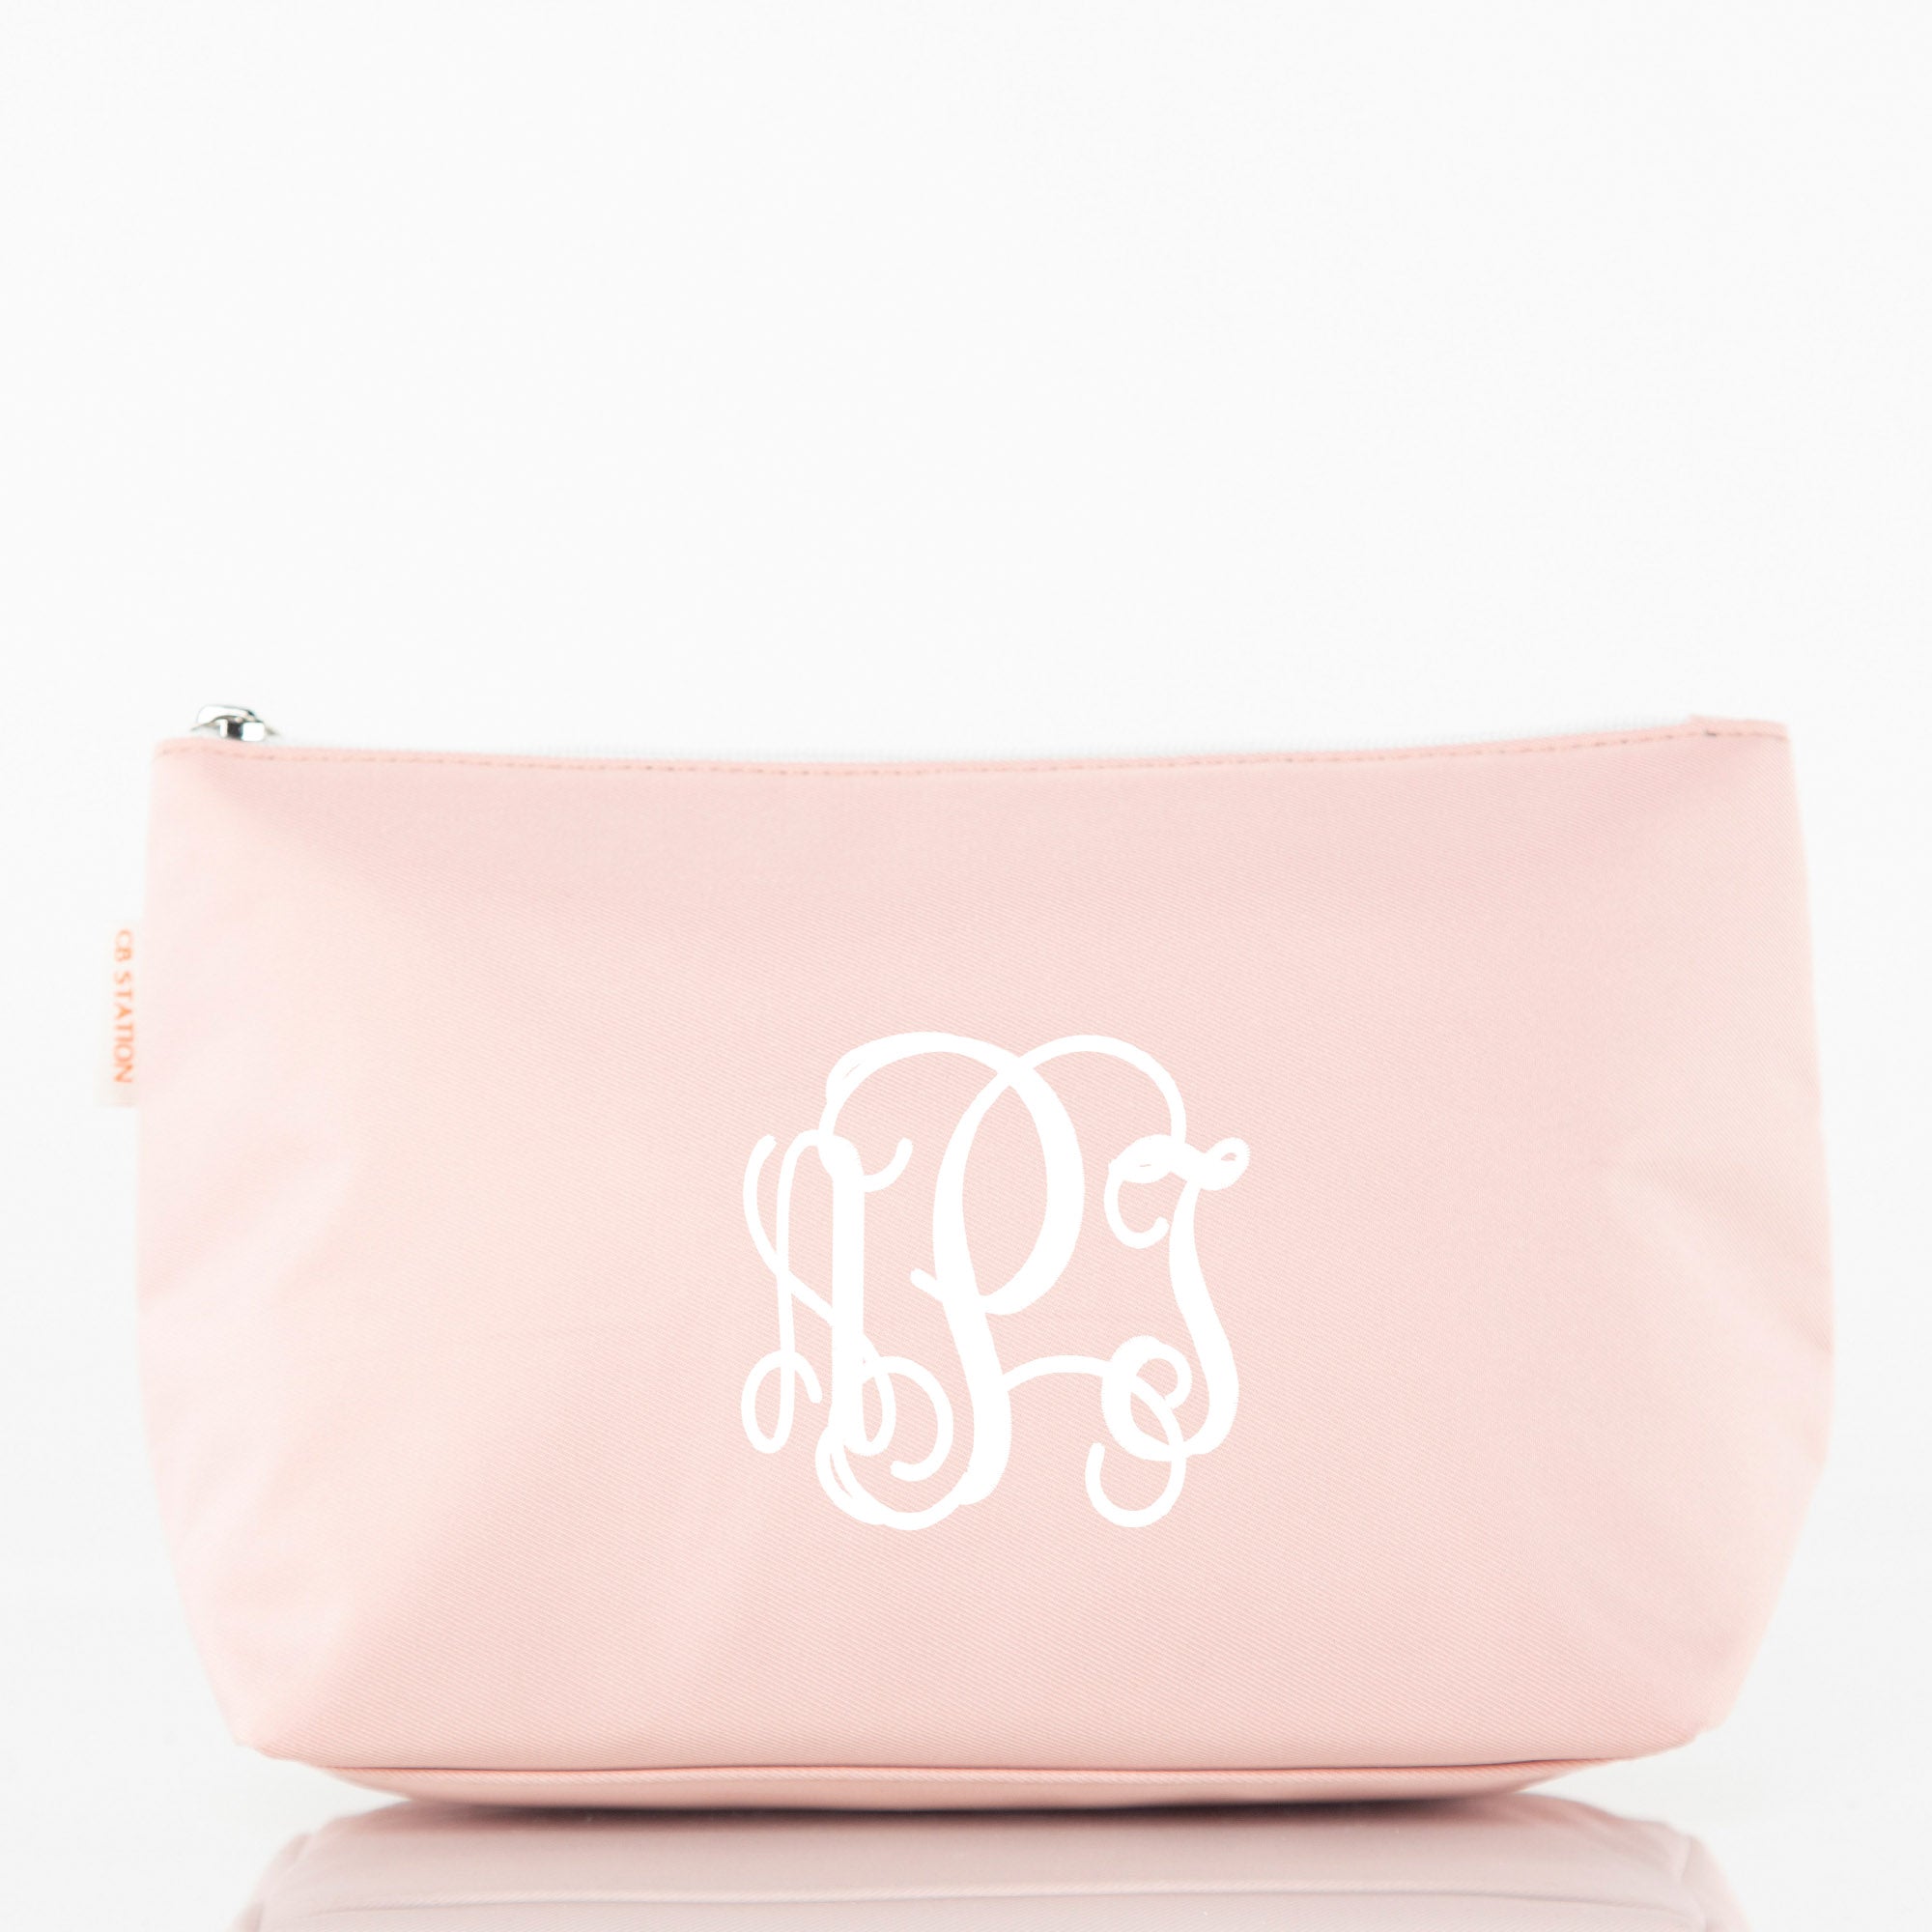 Blush Cosmetic Bag - Personalized